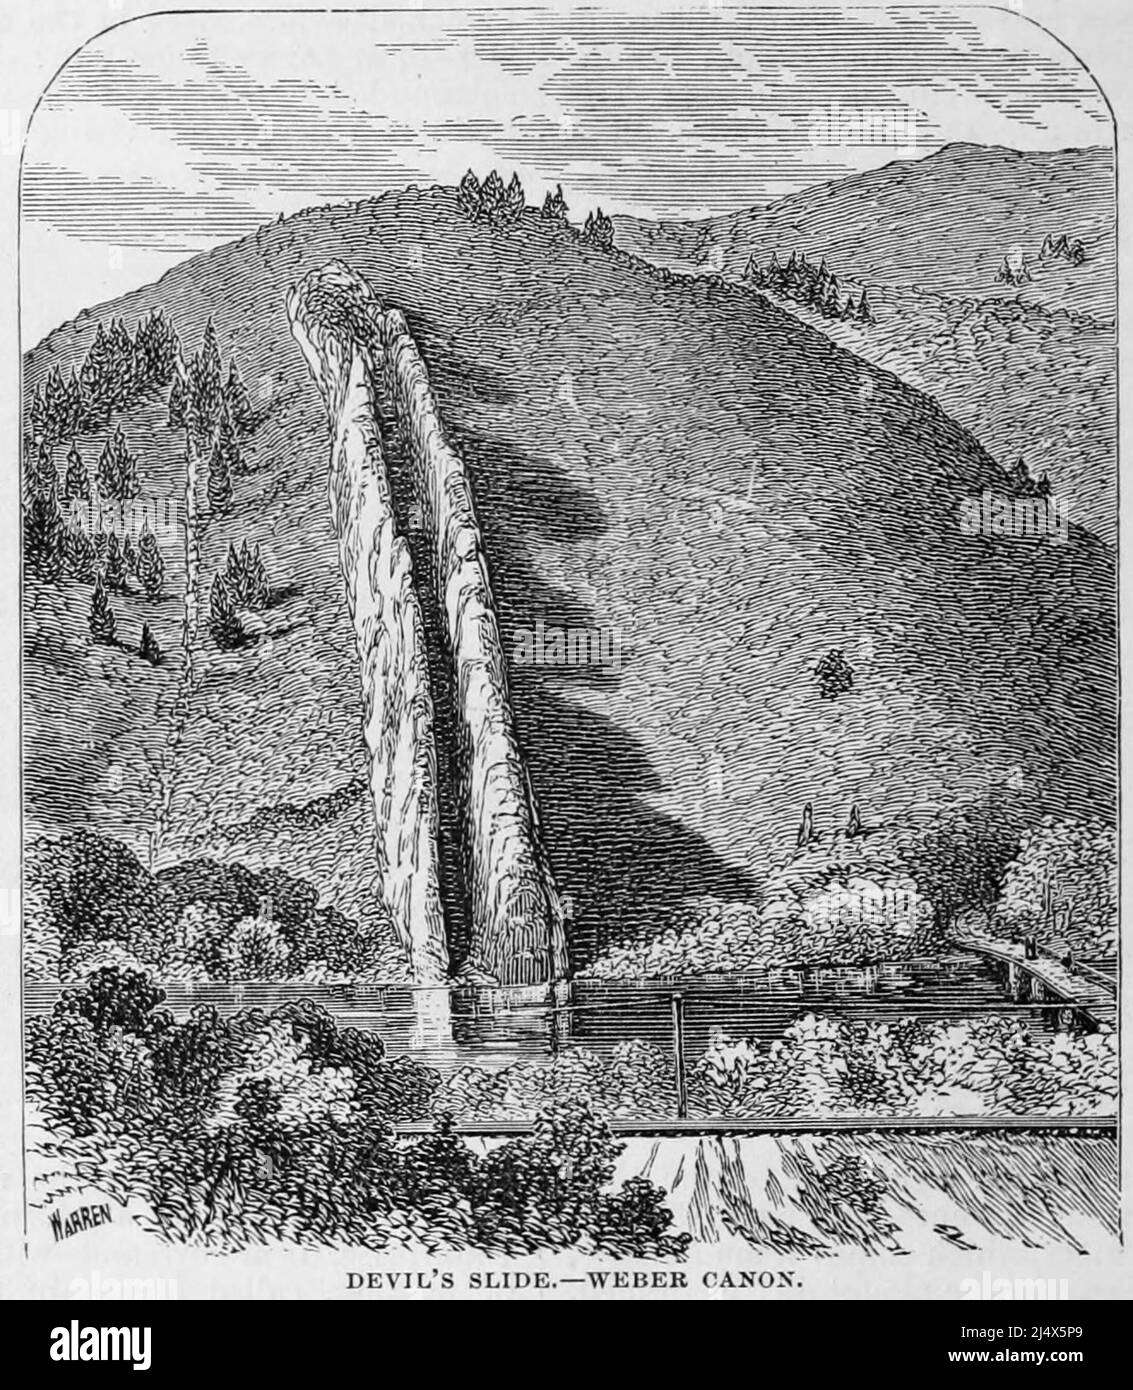 Devil's Slide. Weber Canyon from the book The Pacific tourist : Adams & Bishop's illustrated trans-continental guide of travel, from the Atlantic to the Pacific Ocean : containing full descriptions of railroad routes across the continent, all pleasure resorts and places of most noted scenery in the Far West, also of all cities, towns, villages, U.S. forts, springs, lakes, mountains, routes of summer travel, best localities for hunting, fishing, sporting, and enjoyment, with all needful information for the pleasure traveler, miner, settler, or business man : a complete traveler's guide of the U Stock Photo